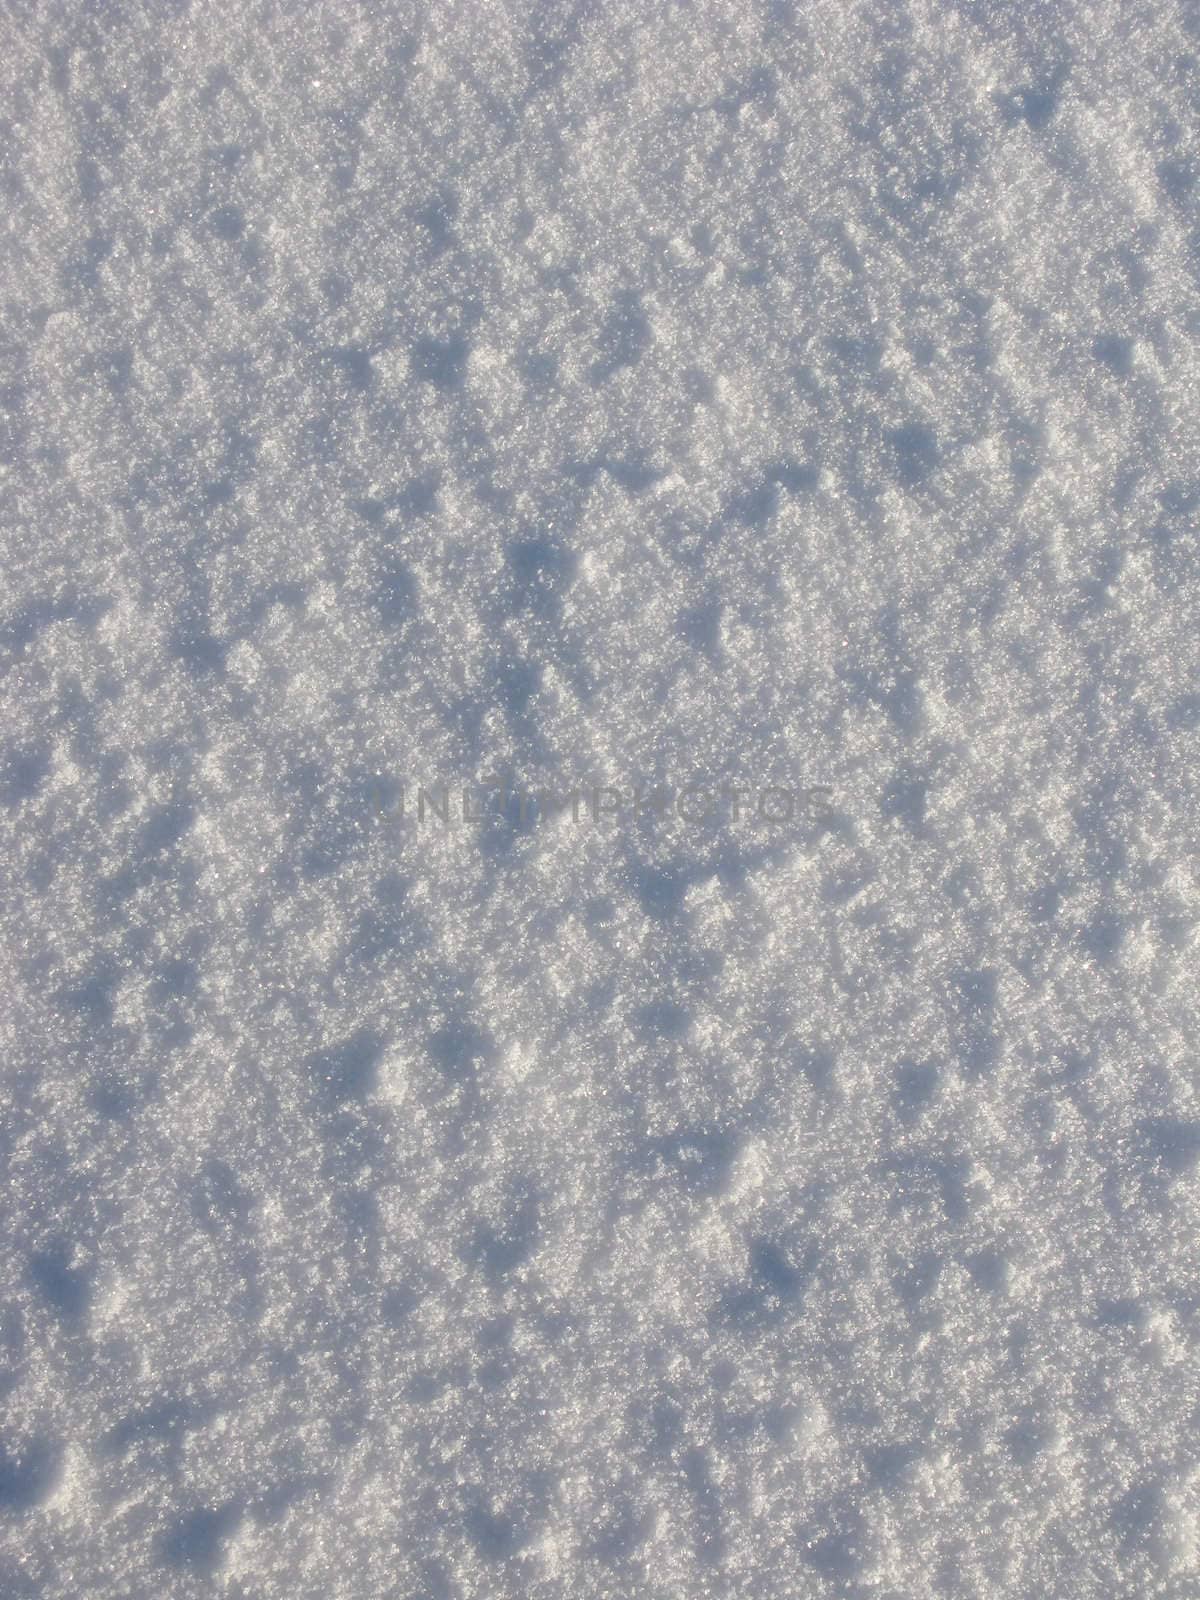 Texture of snow surface on sunny day